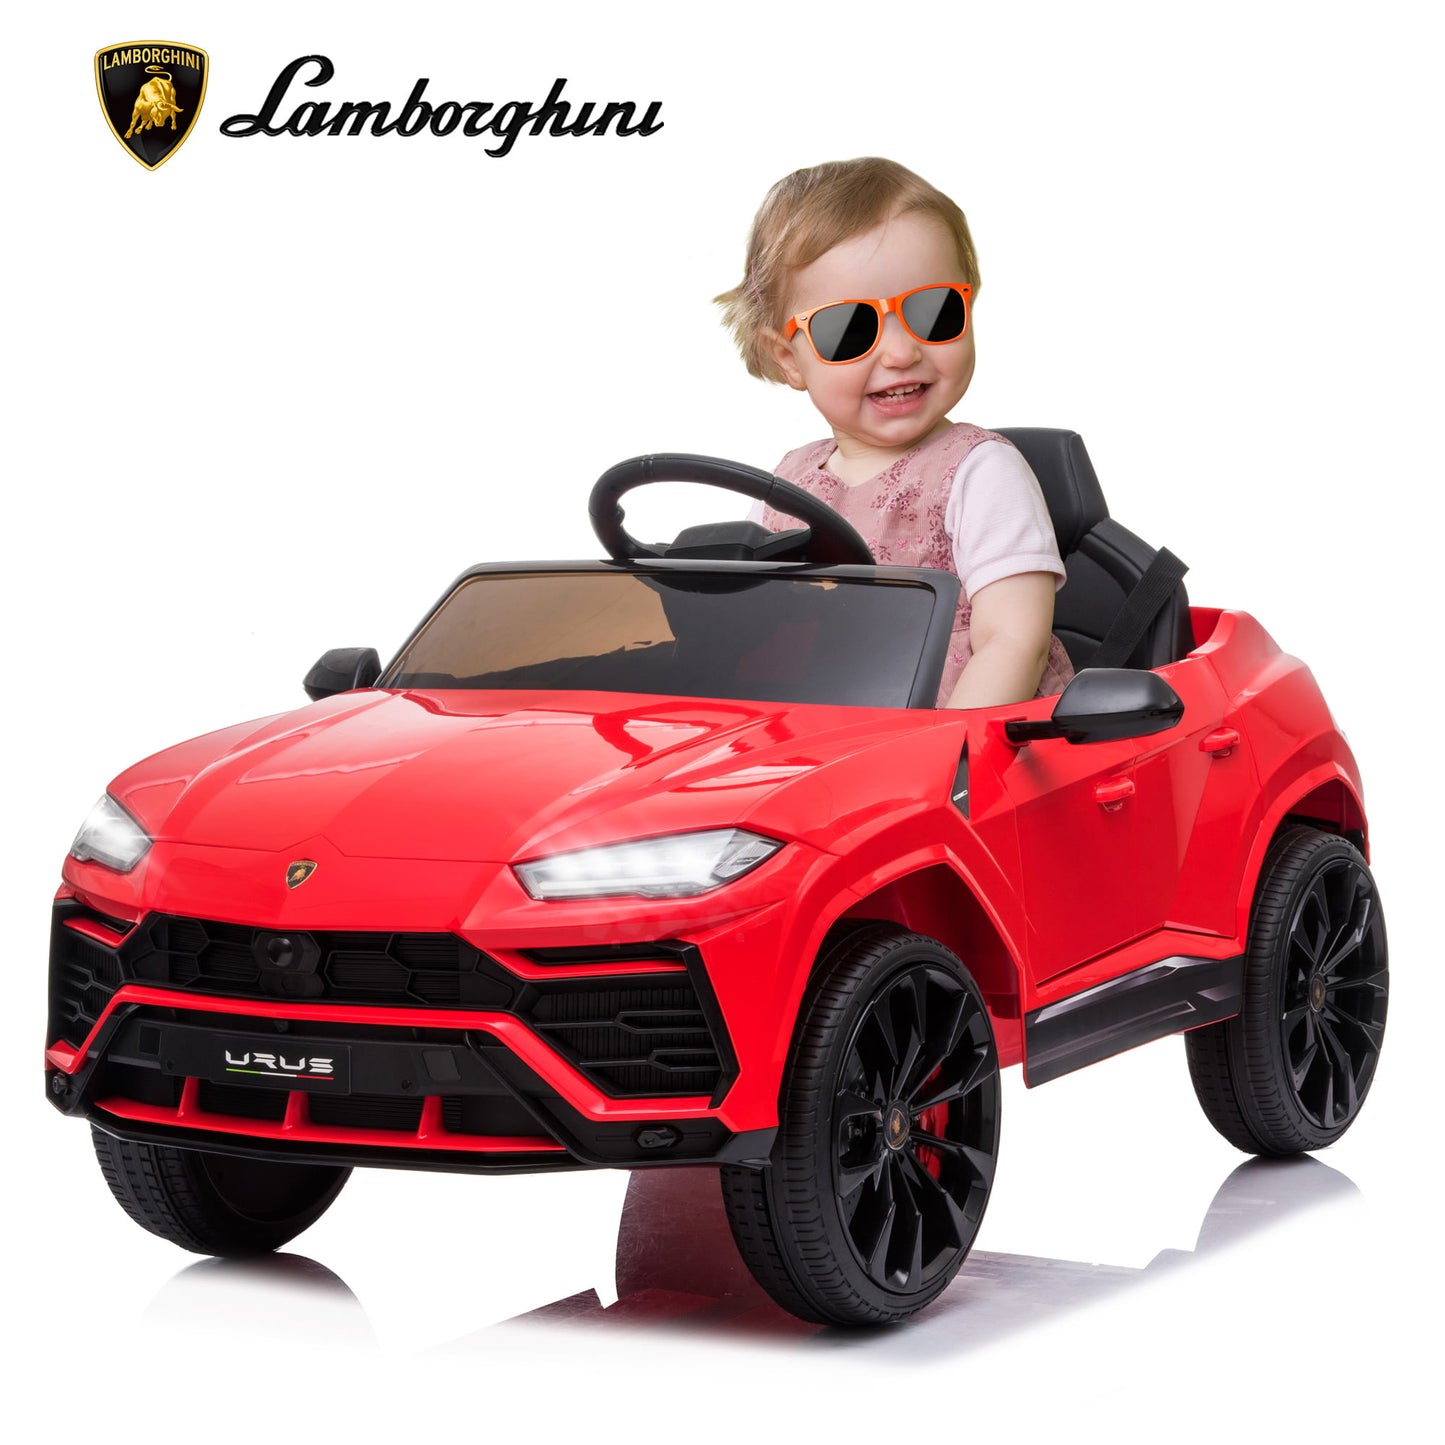 iRerts 12V Lamborghini Charger SRT Boys Girls Kids Ride on Car Toys, Electric 12V Battery Operated Riding Toys with Remote Control for Christmas Birthday Gift,Red